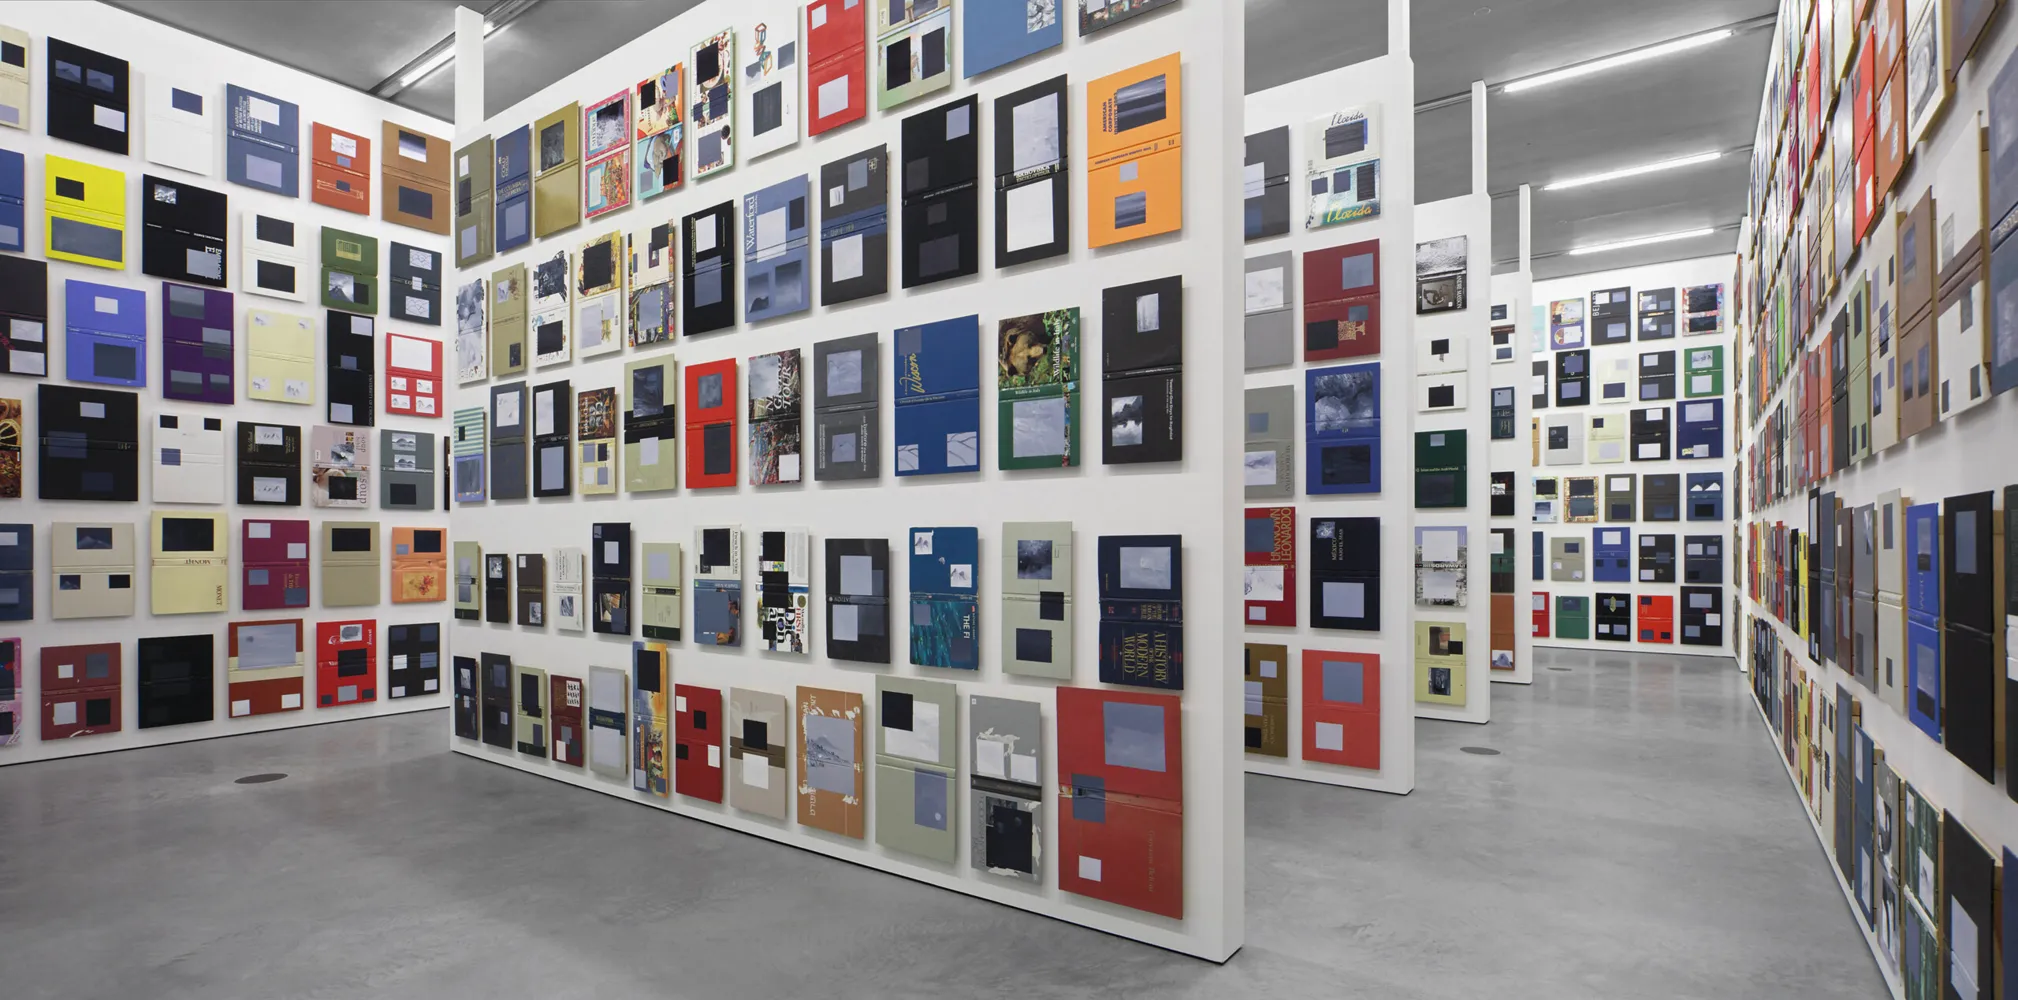 FUTURE PRESENT. Emanuel Hoffmann Foundation. Contemporary Art from Classic Modernism to the Present Day, 13 June 2015 - 31 January 2016, Schaulager® Münchenstein/Basel, installation view: Paul Chan, Volumes, 2012, Installation consisting of 1005 painte...